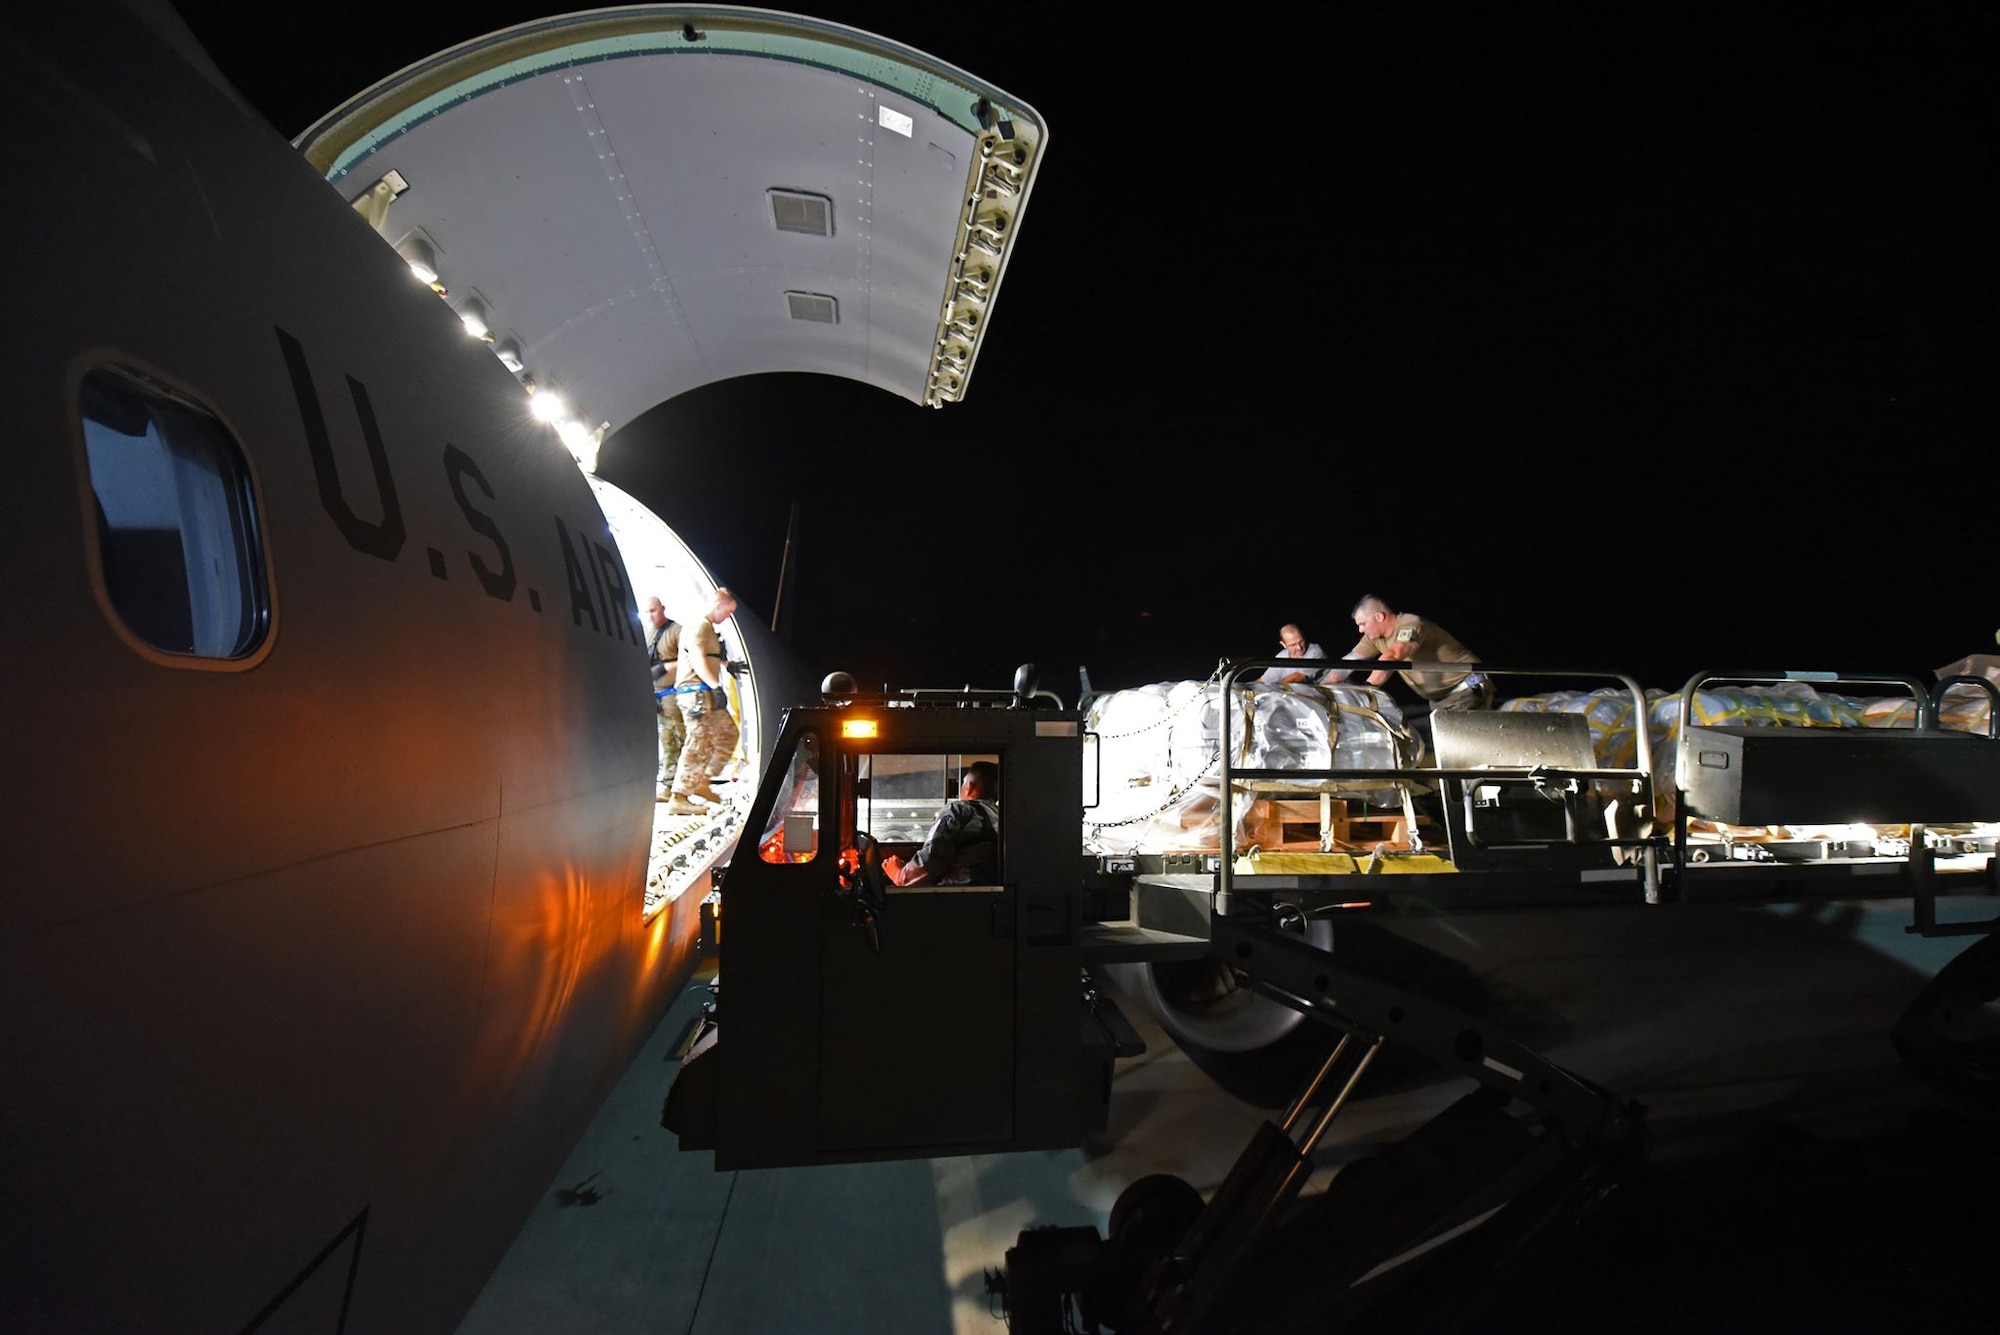 U.S. Airmen from the 60th Aerial Port Squadron from Travis Air Force Base, California, load cargo onto a McConnell AFB, Kansas, KC-46 Pegasus Aug. 21, 2019. The KC-46's stop at Travis entailed a late-night load of life rafts and other cargo for the U.S. Navy's USS Port Royal. (U.S. Air Force photo by Senior Airman Christian Conrad)